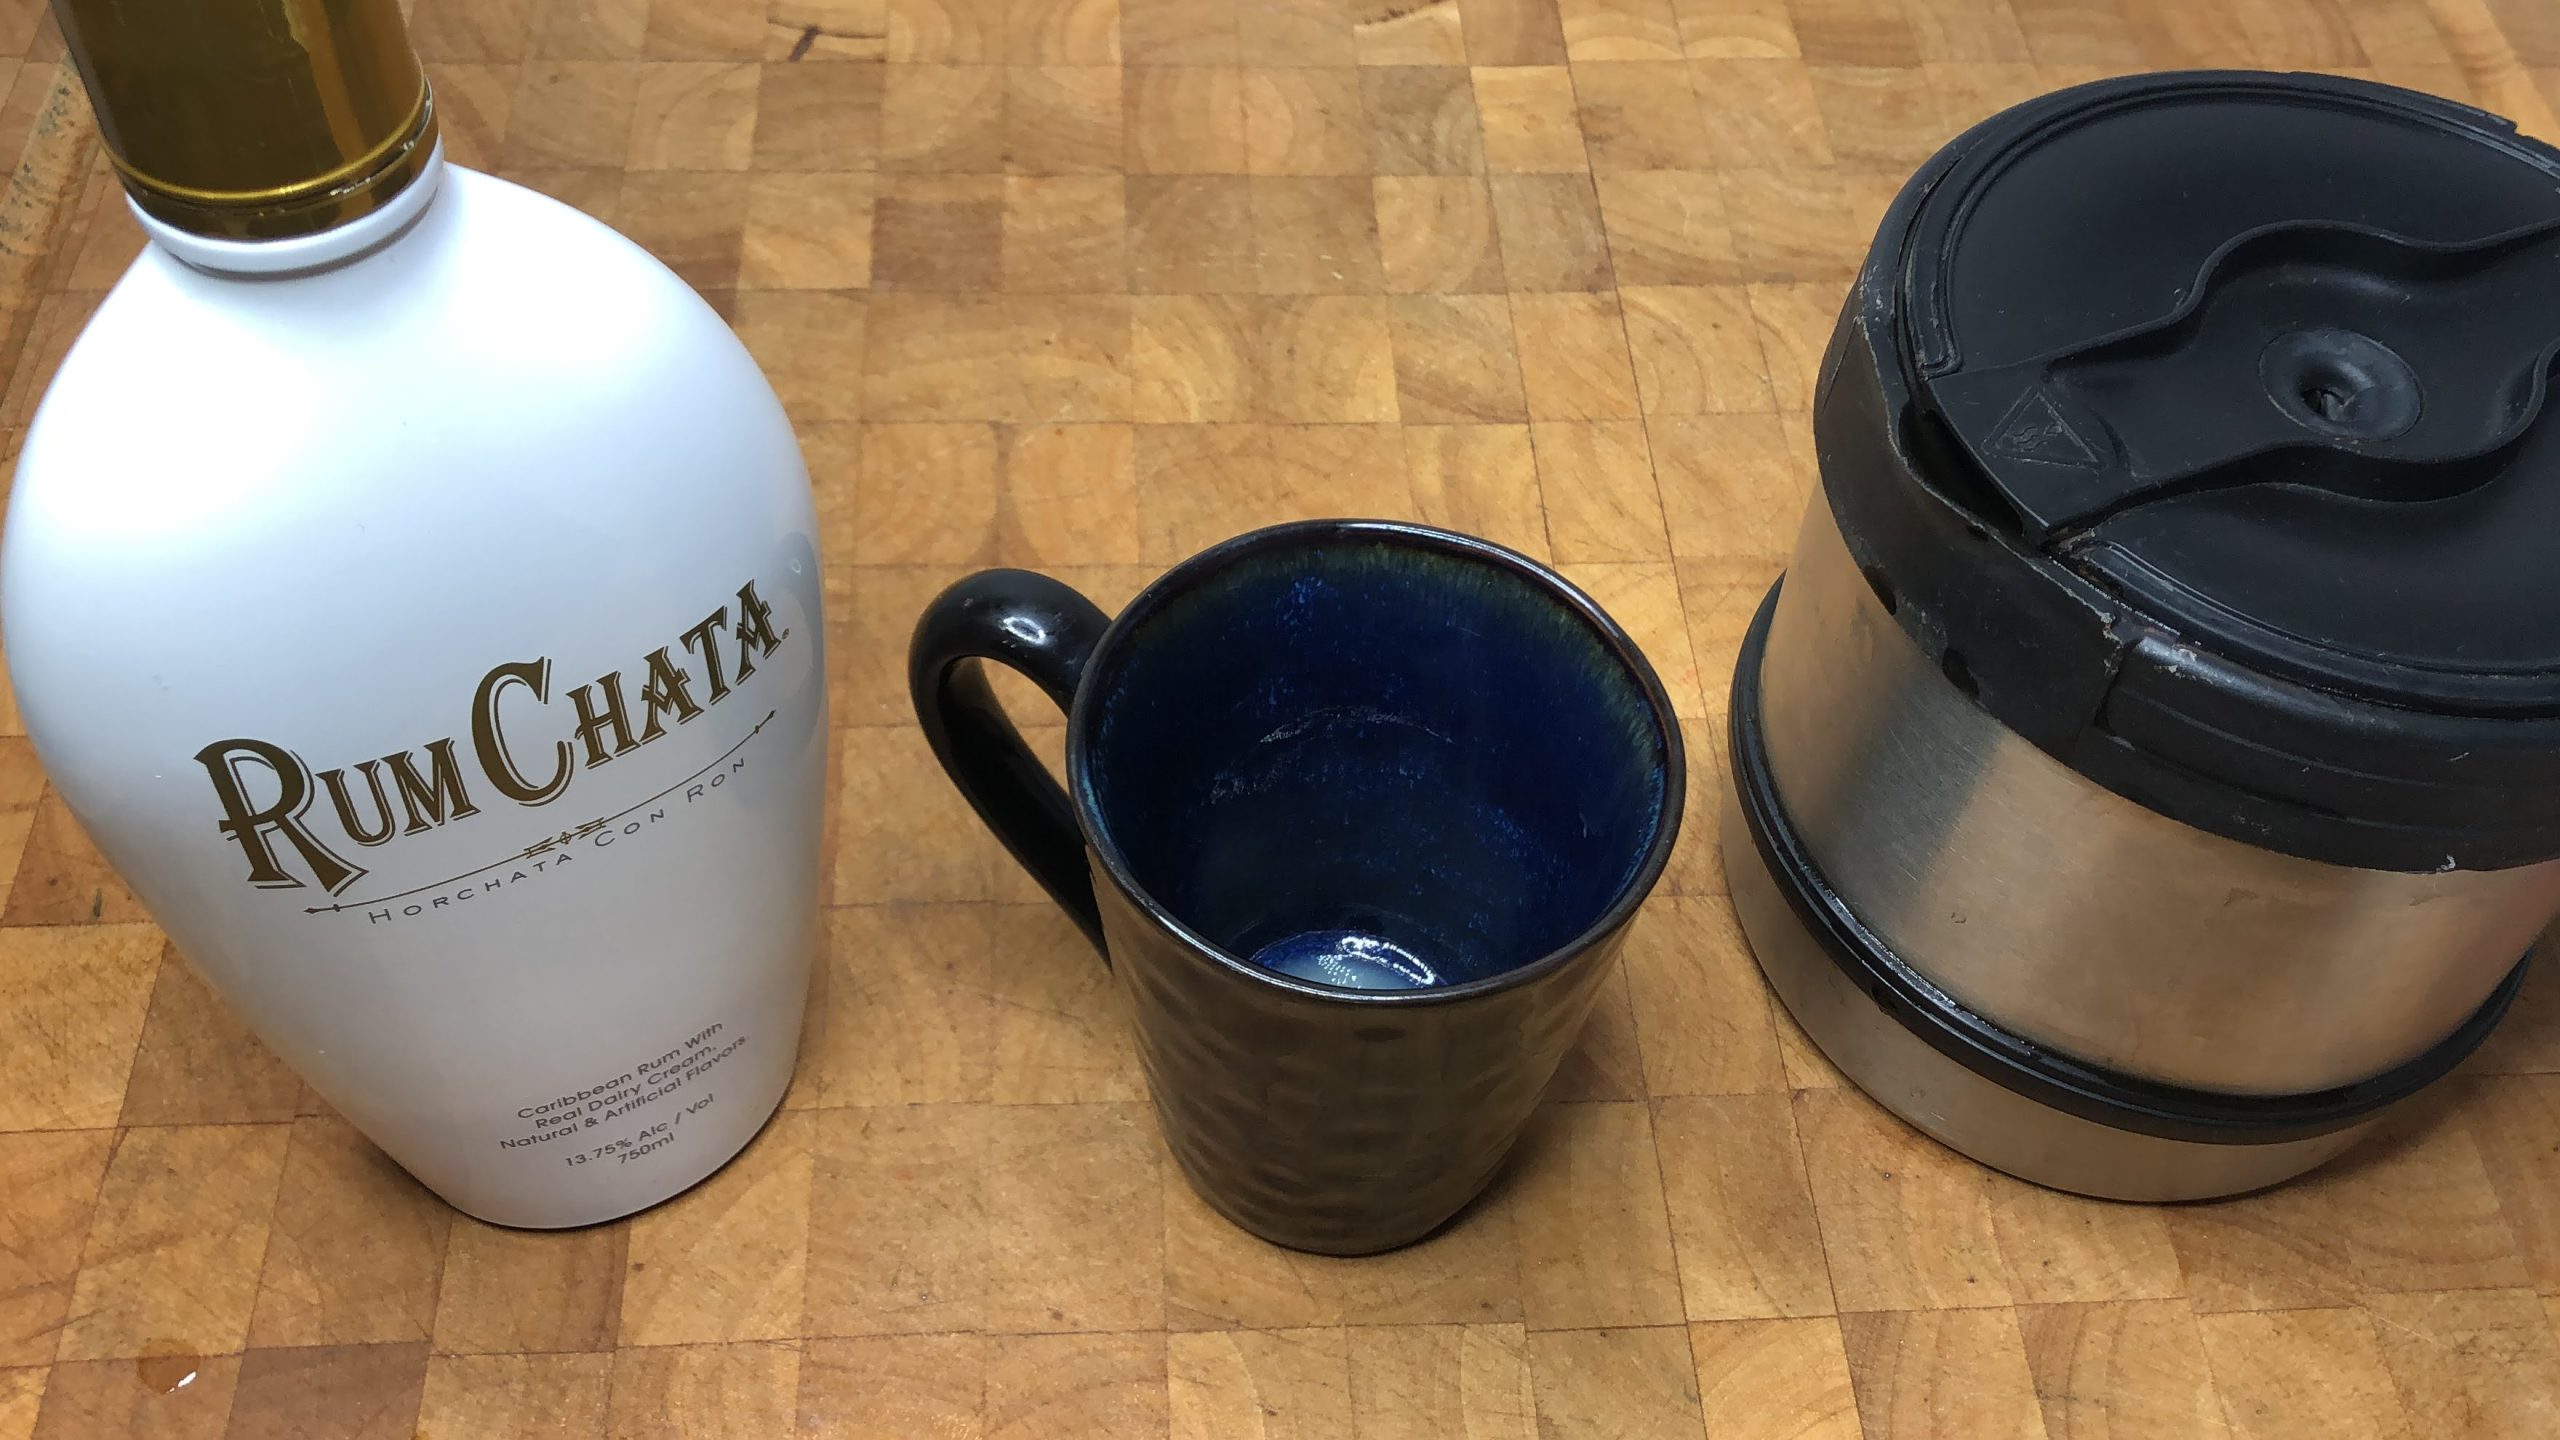 coffee mug, coffee pot and bottle of rumchata on a wooden table